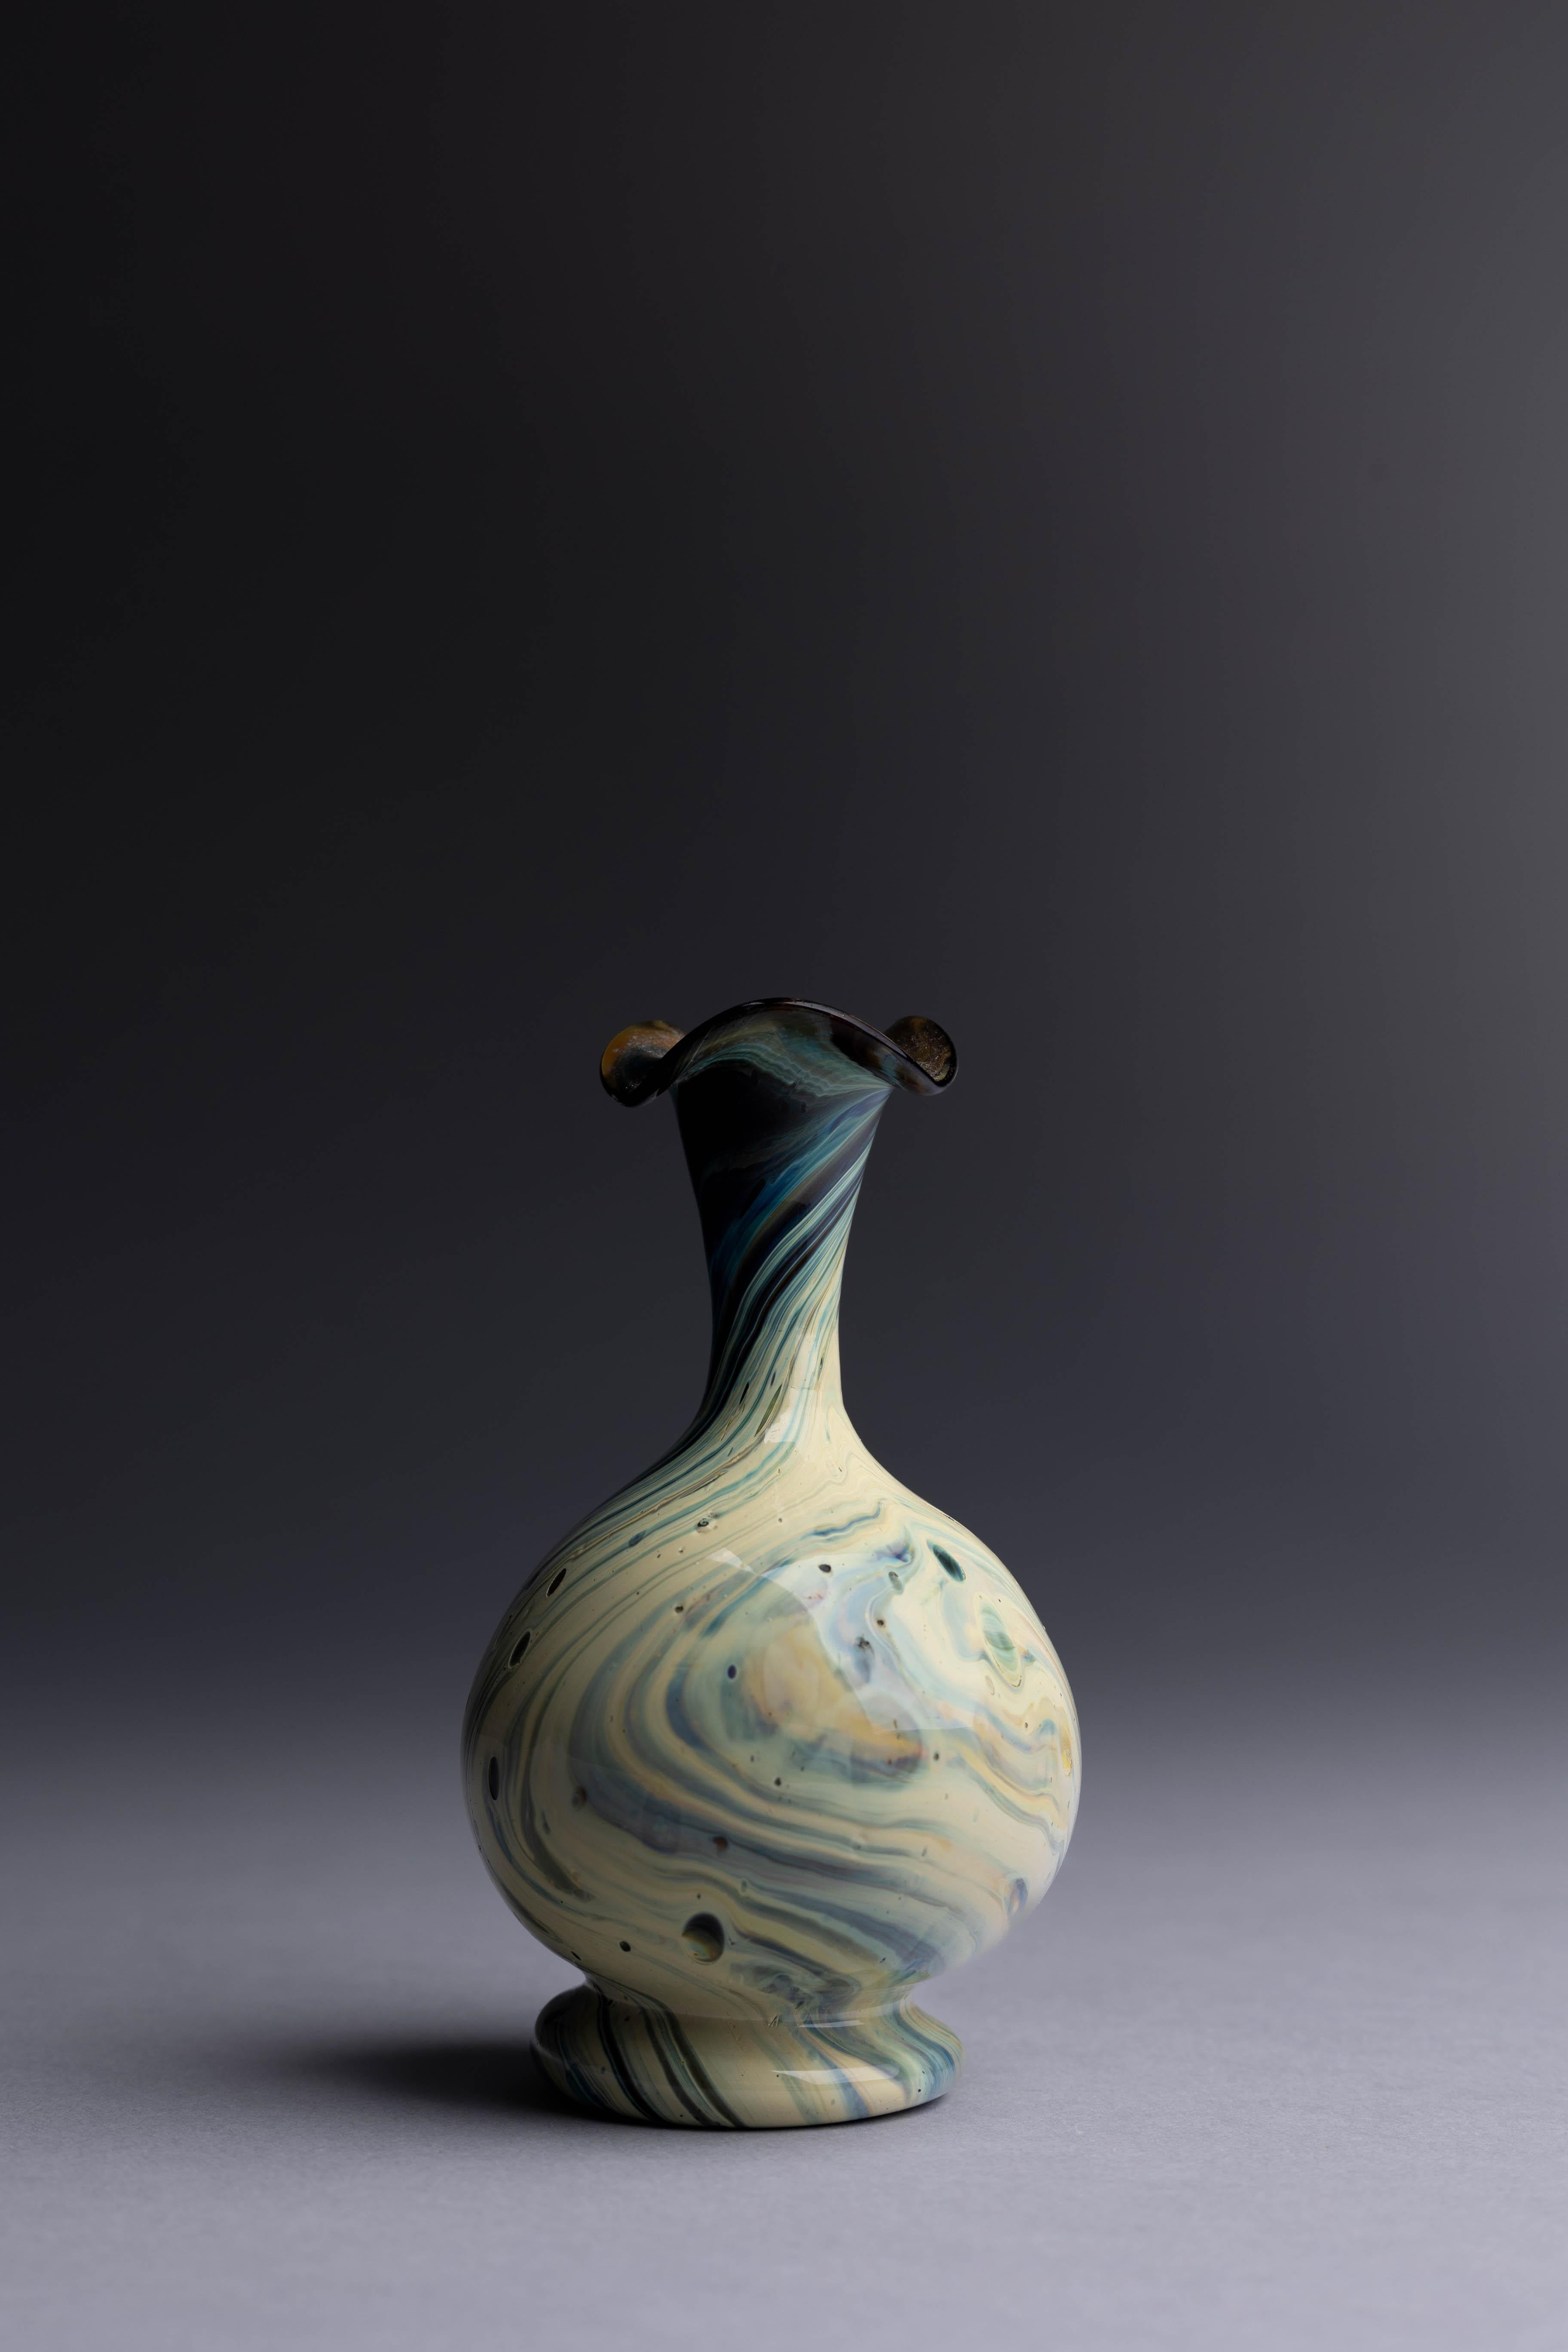 19th Century Murano Italian Glass Vase by Salviati In Excellent Condition For Sale In Fort Lauderdale, FL